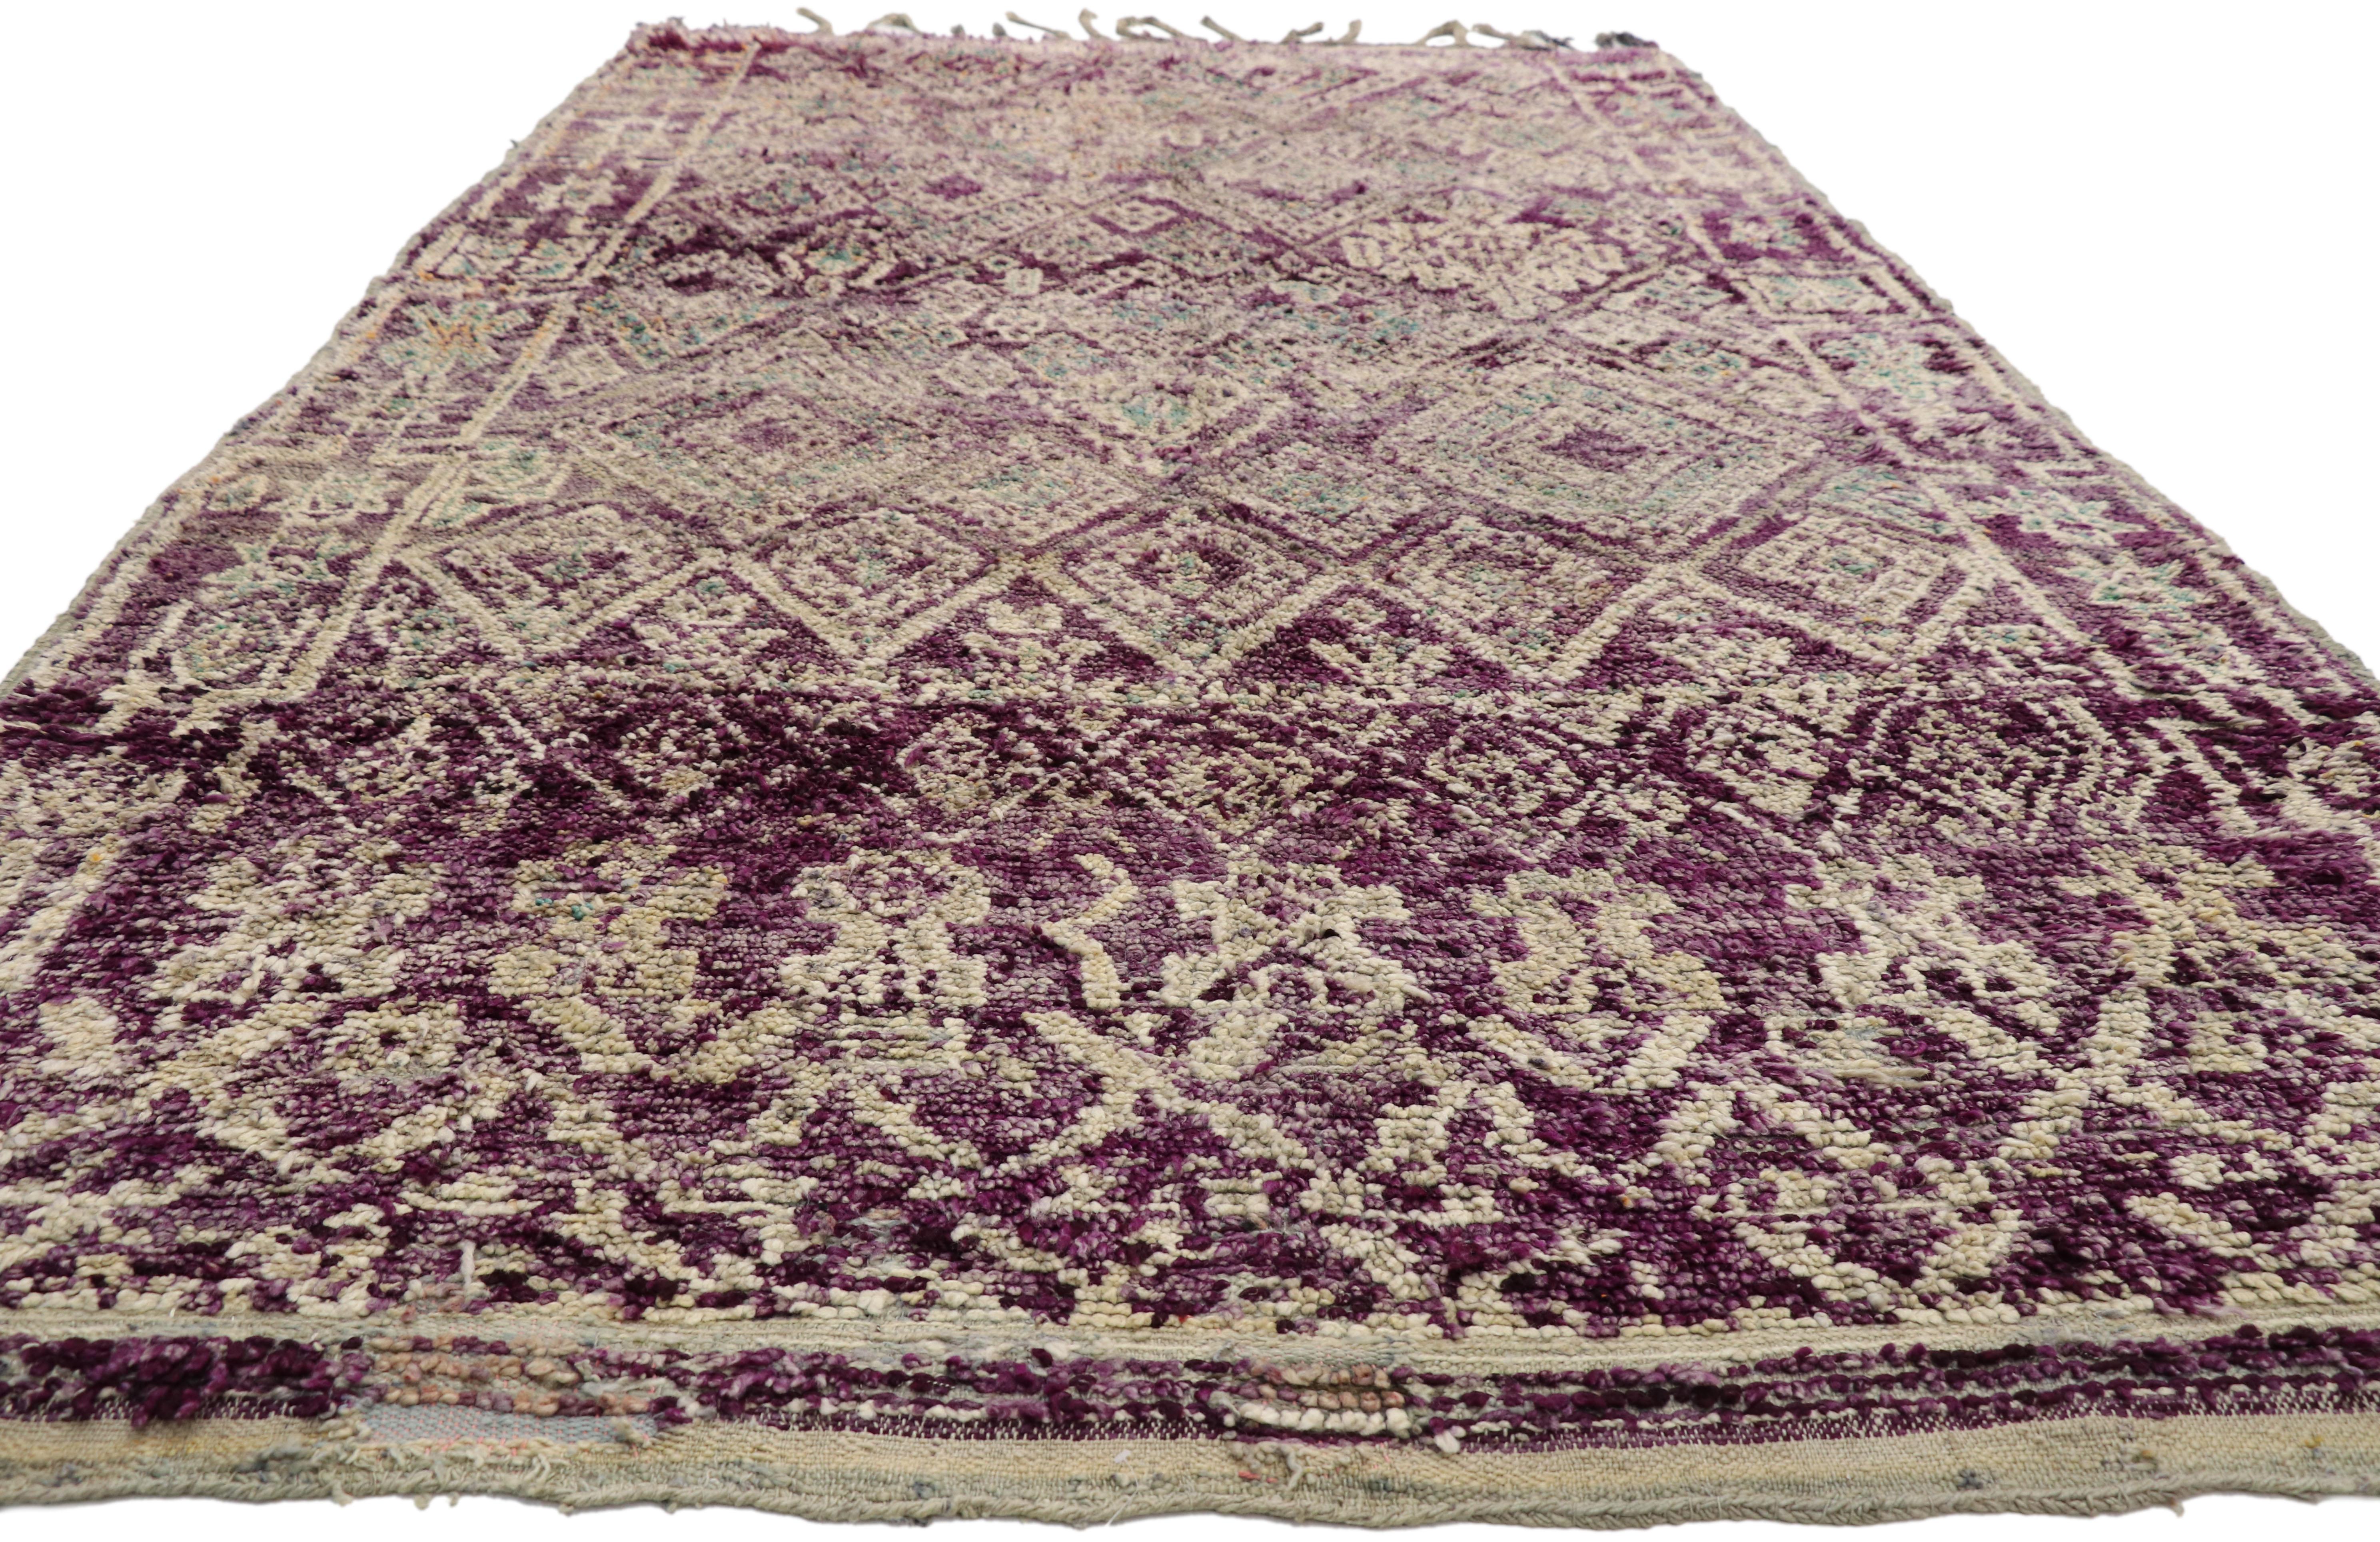 Hand-Knotted Vintage Berber Purple Moroccan Mrirt Rug with Tribal Style